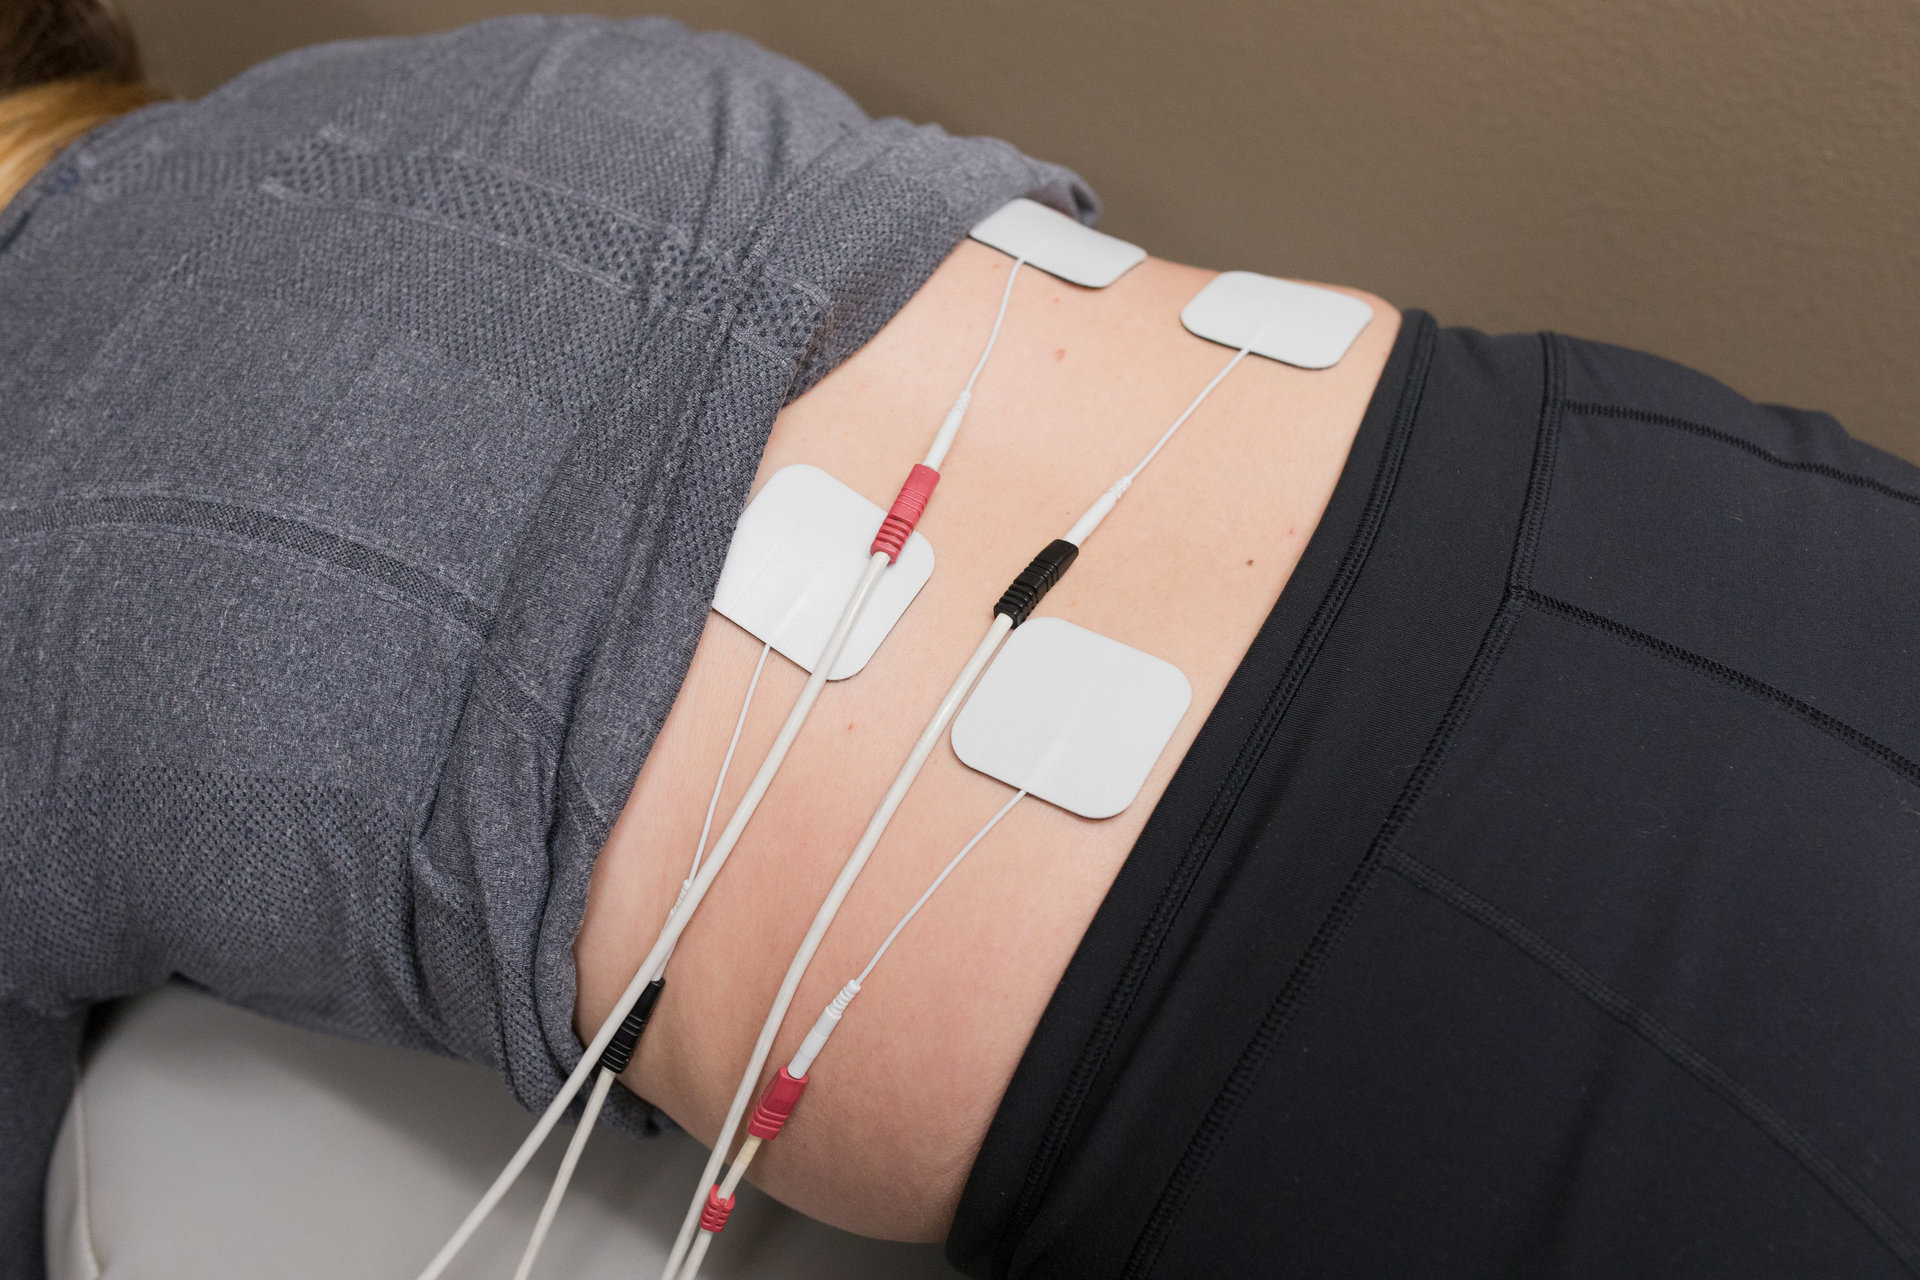 Electrical Muscle Stimulation in Columbia SC - Devine Chiropractic